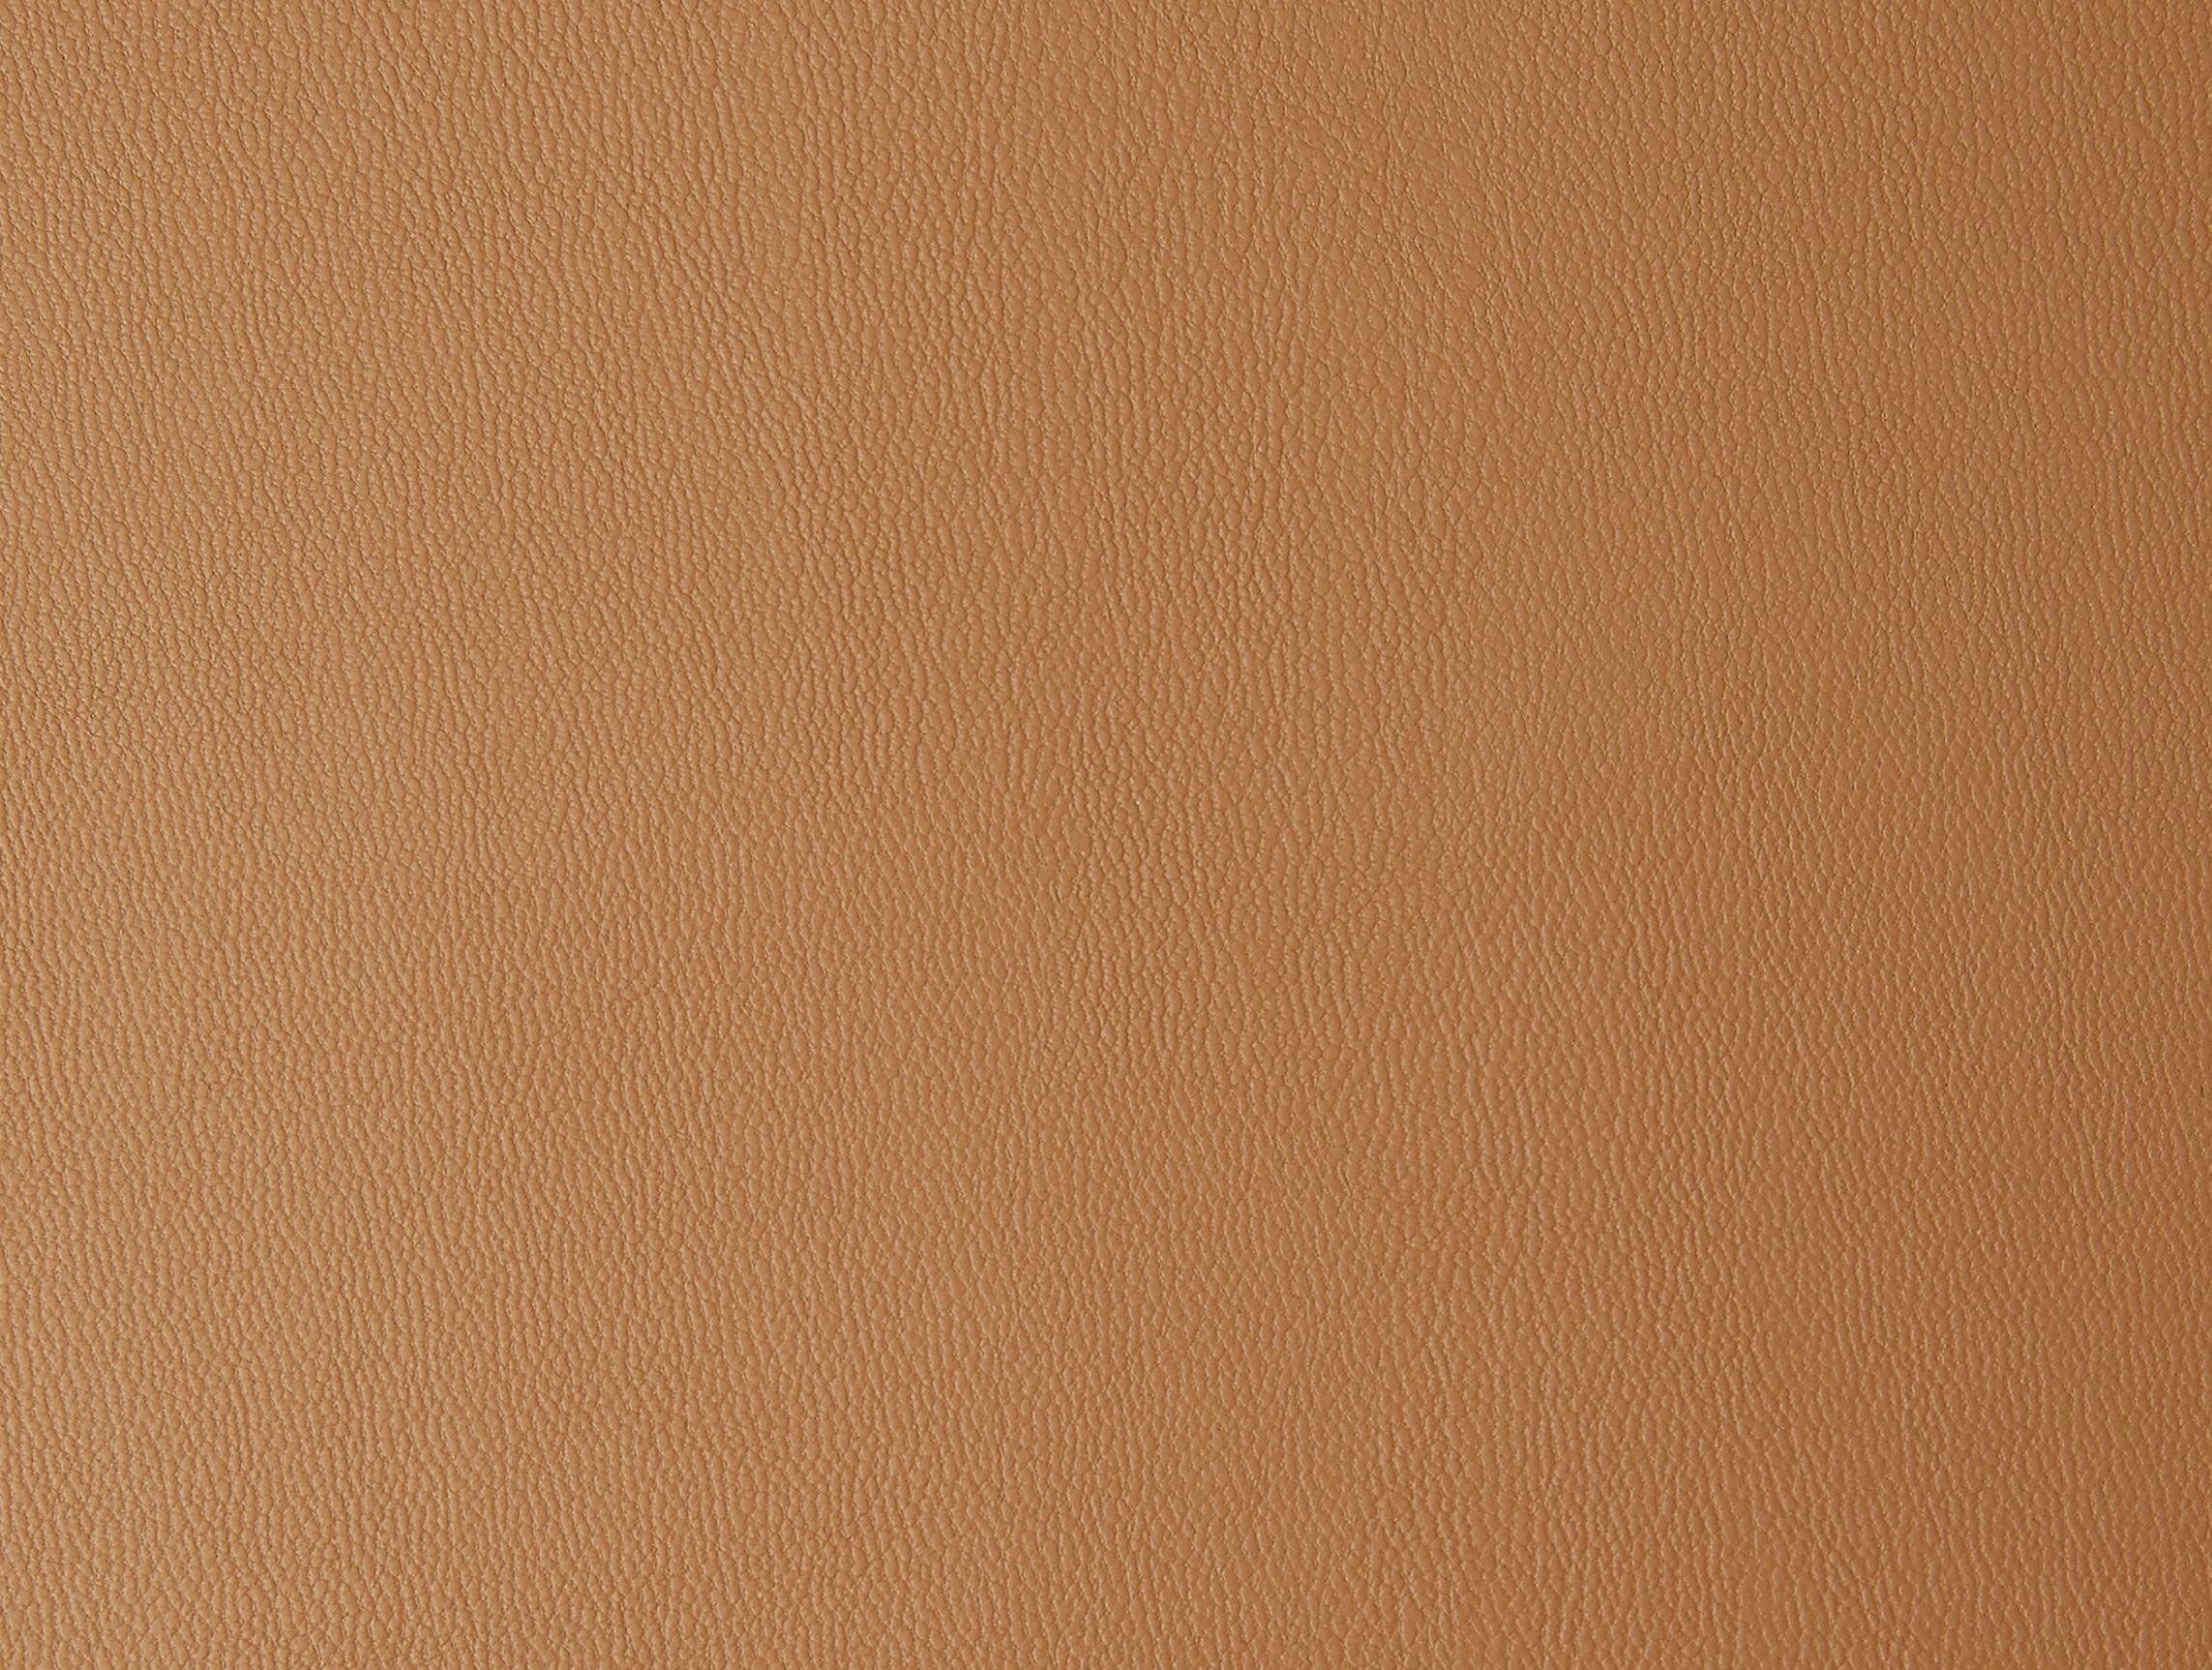 Banbū Leather in Banbū Leather in Caramel image 1